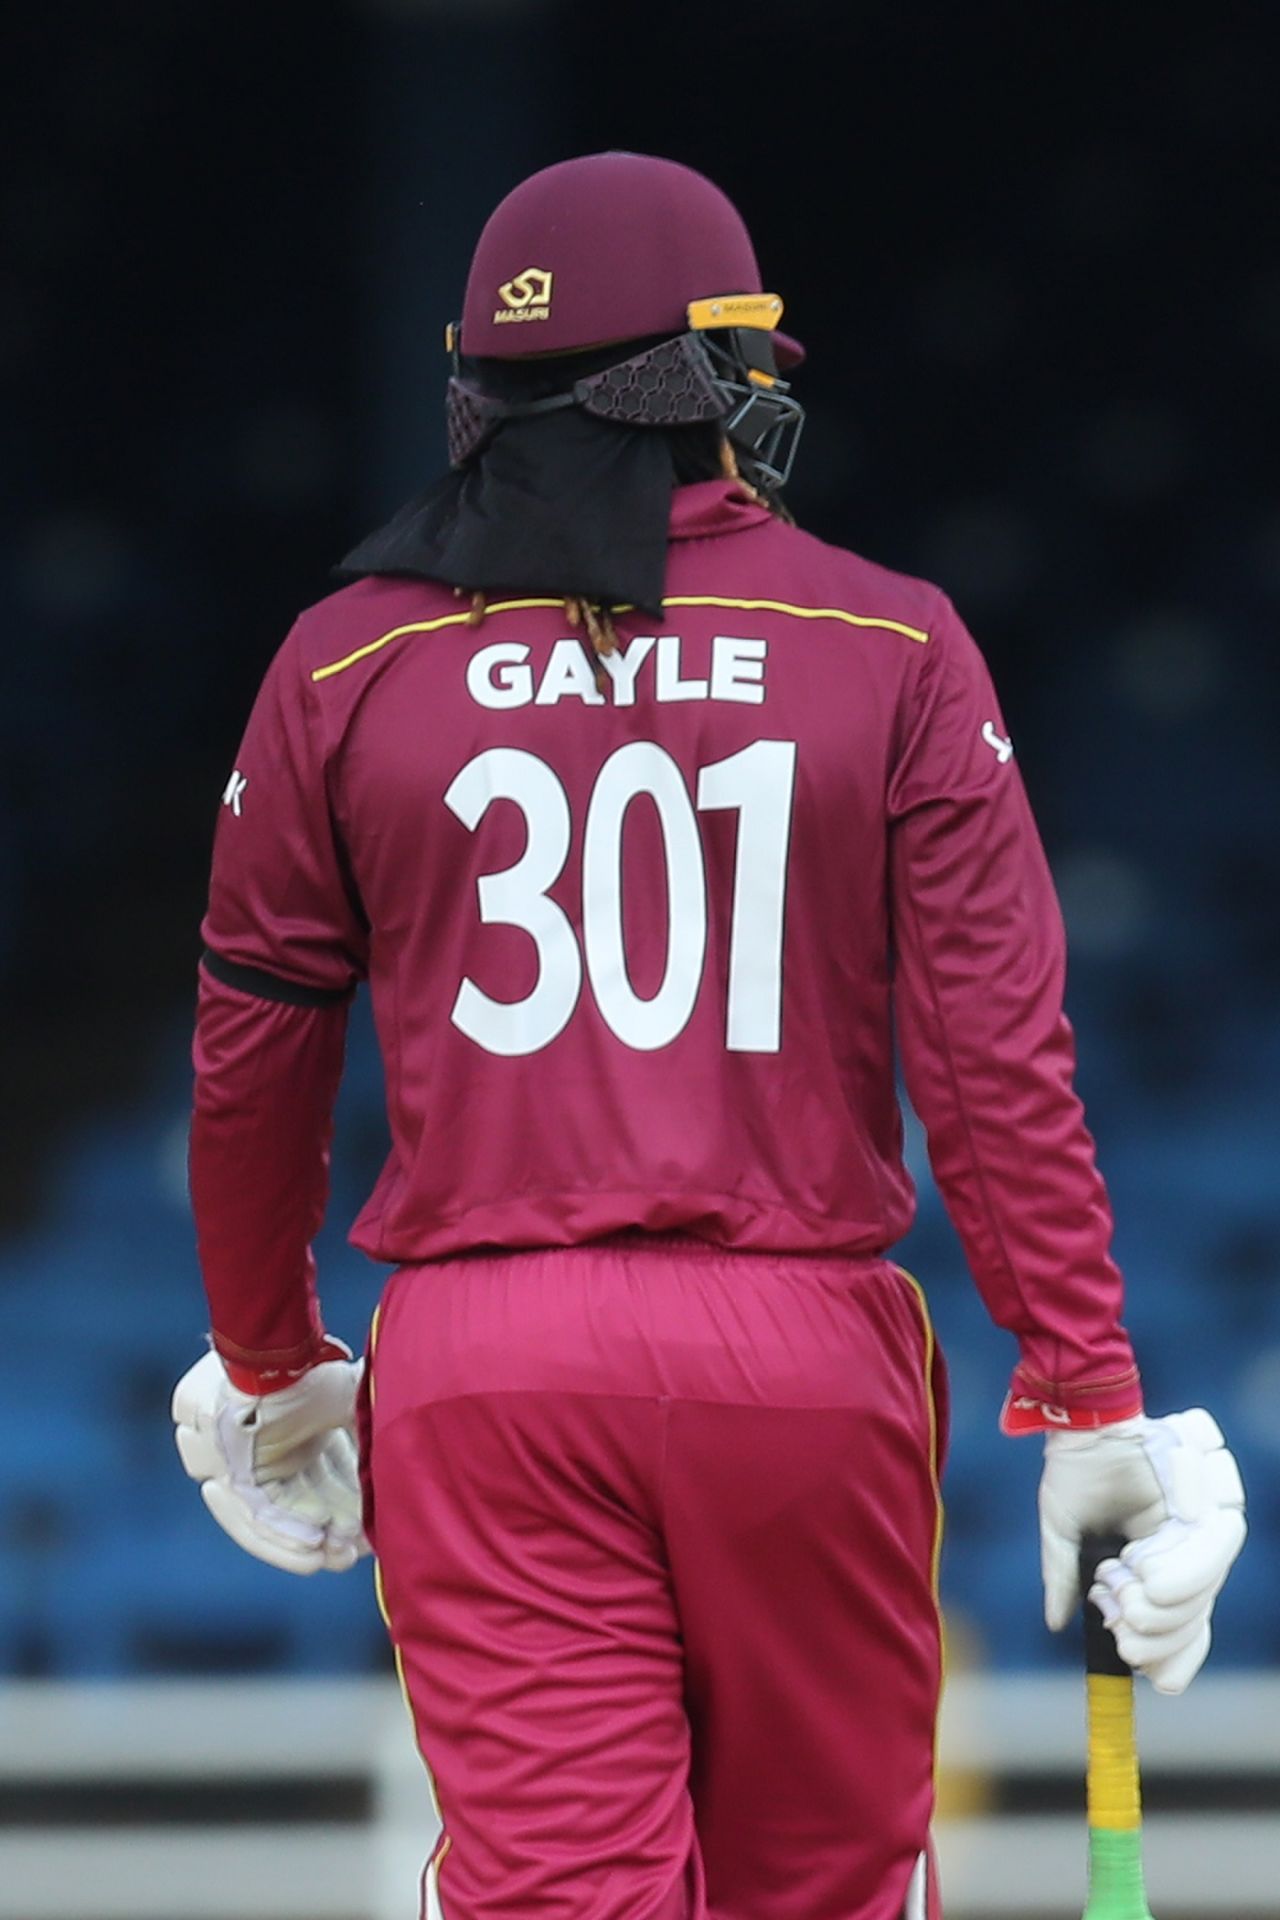 Chris Gayle wore a special, commemorative shirt for his 301st ODI, West Indies v India, 3rd ODI, Port of Spain, August 14, 2019